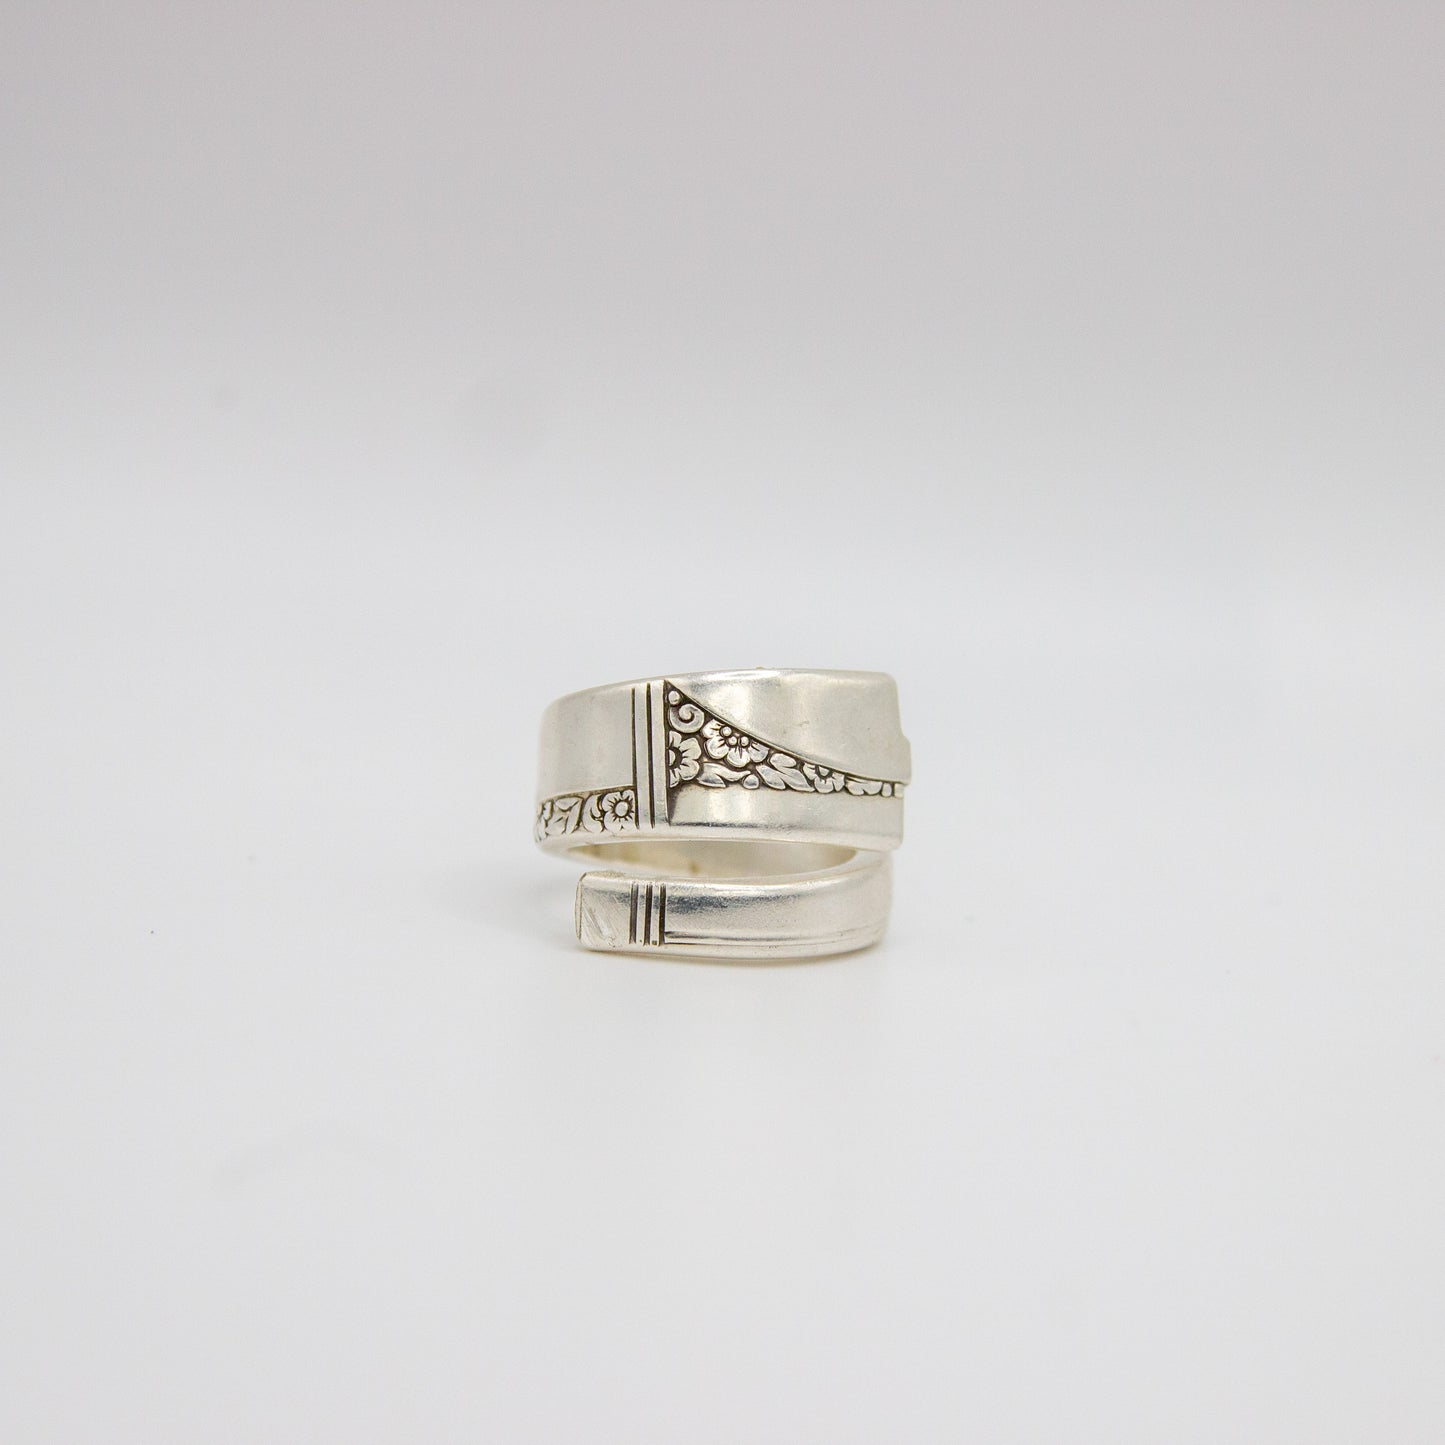 Caprice Wrapped Spoon Ring